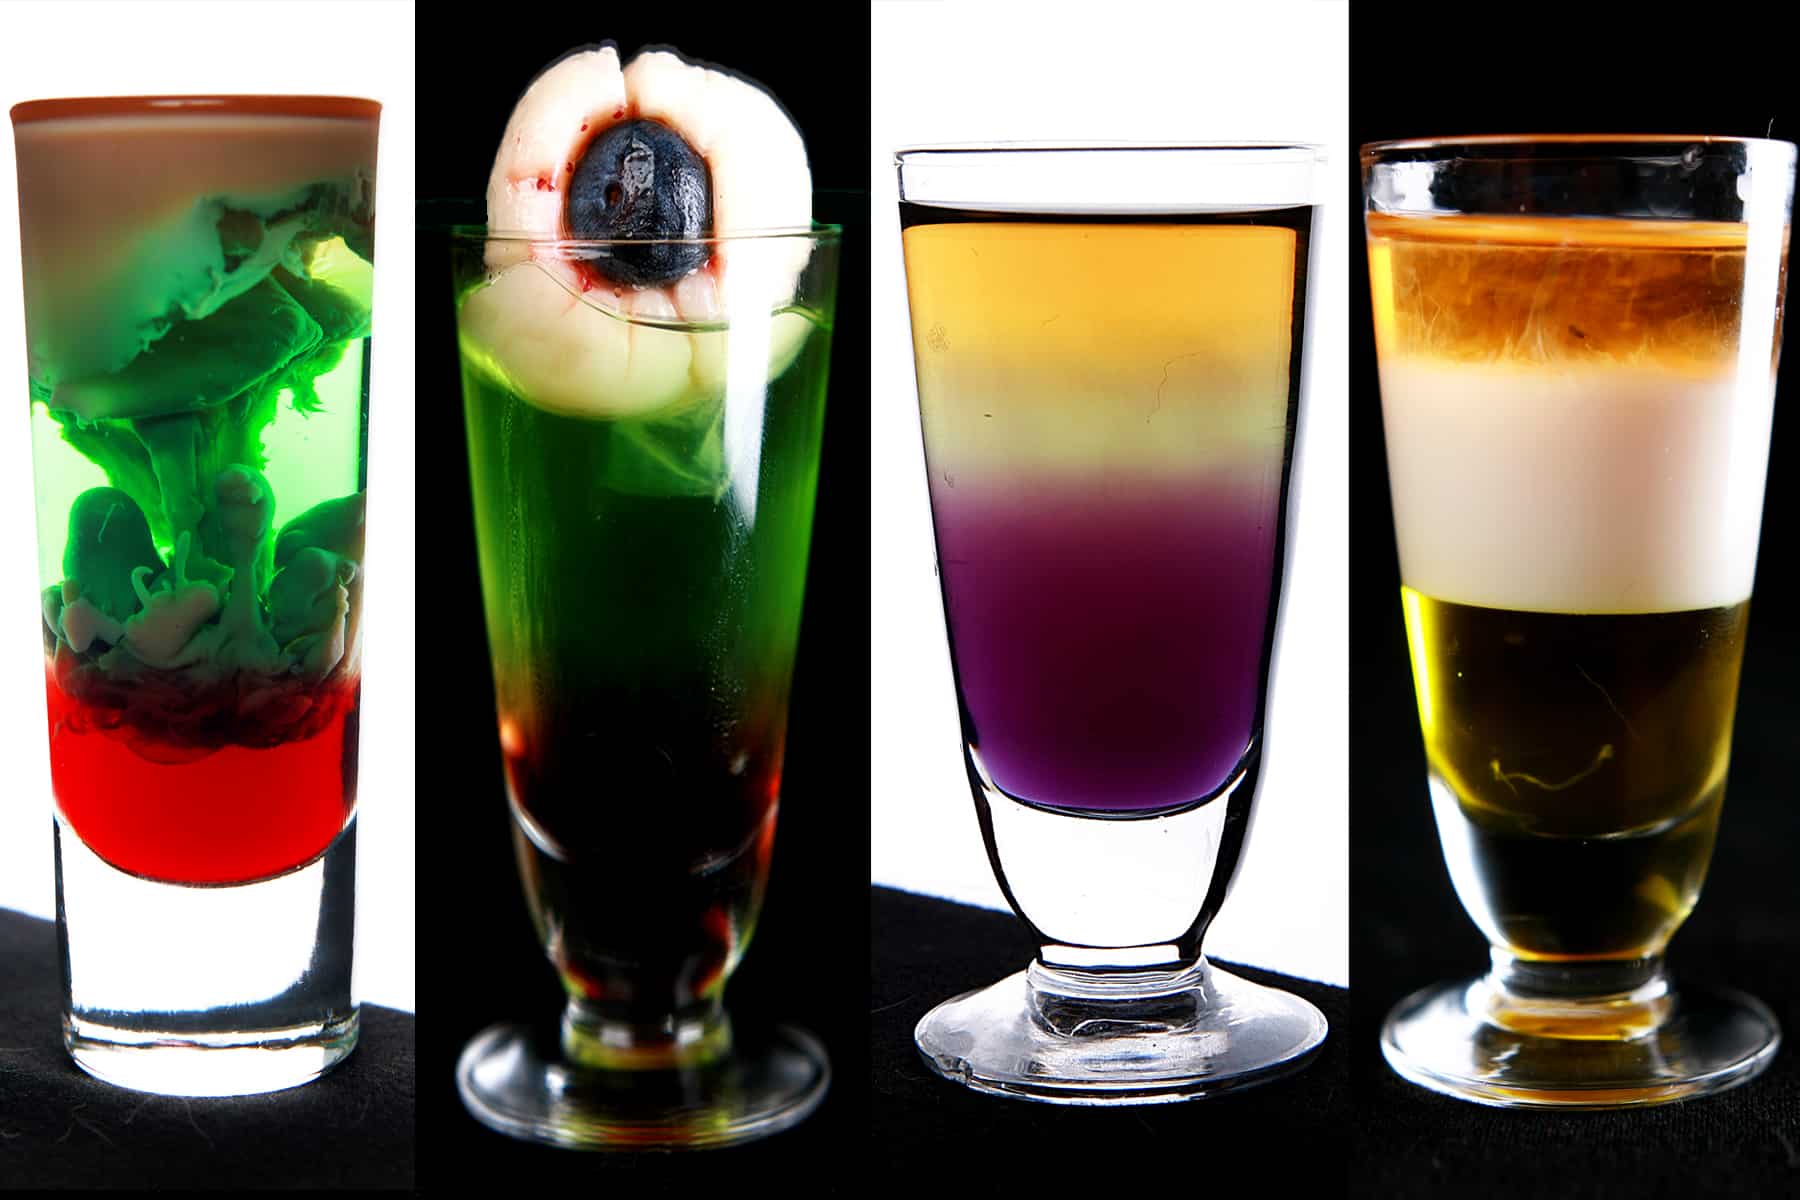 A row of 4 different Halloween shooters, each with layers of colors.